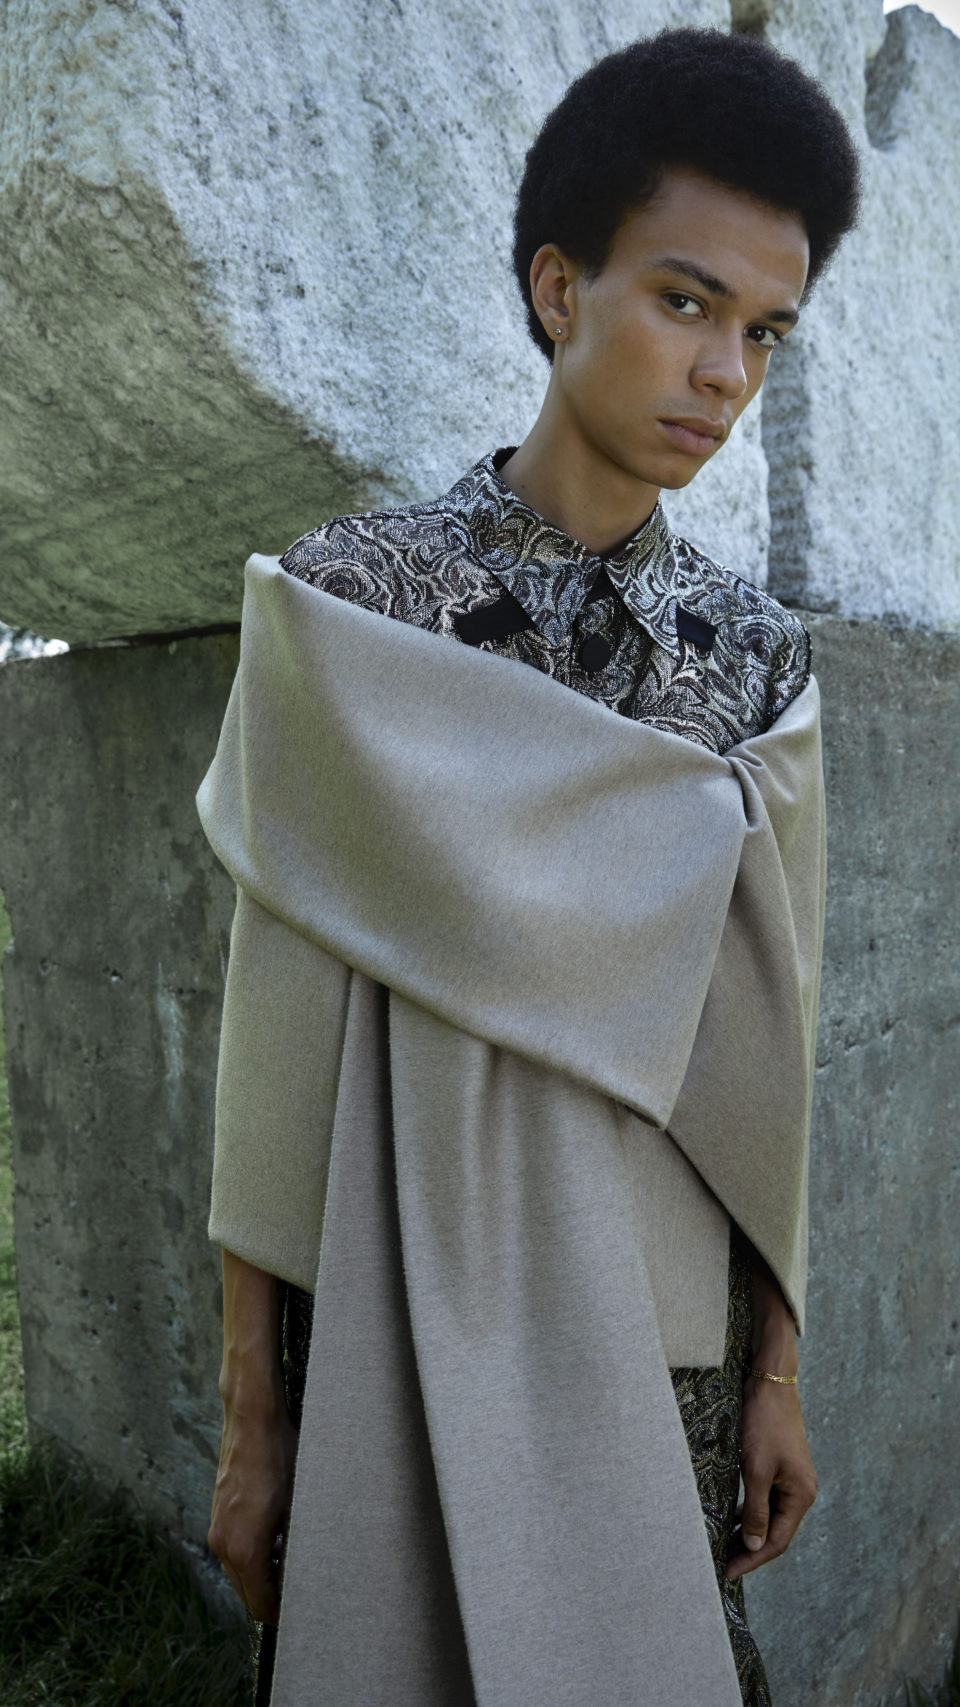 Camel Cashmere Shawl from fall winter 2021 - MAR by Maria Karimi